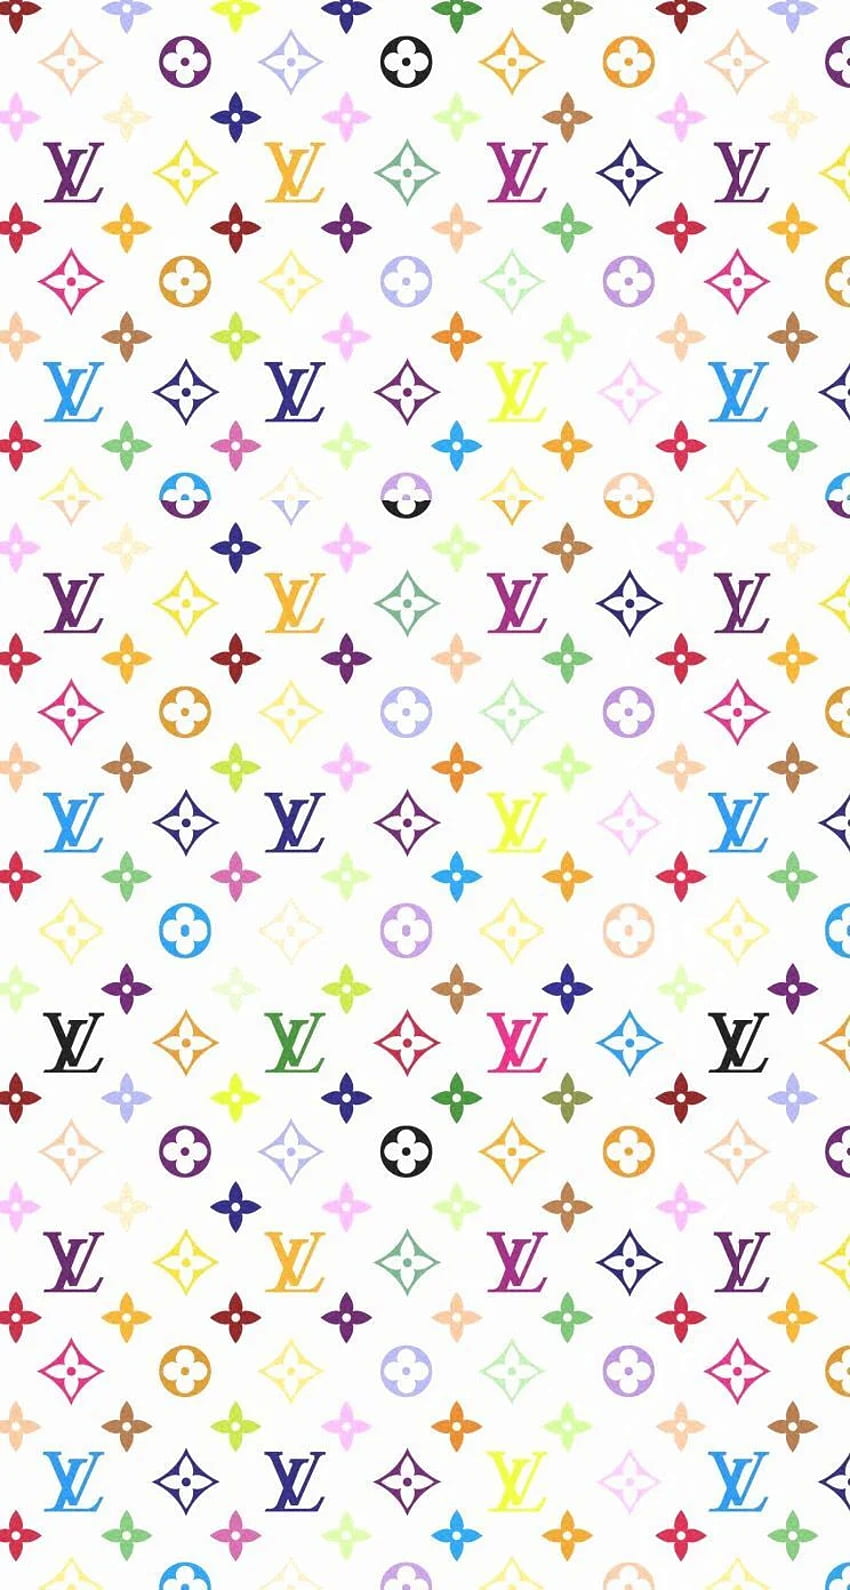 Louis Vuitton, Chanel, Gucci Wallpapers For IPhone  Iphone wallpaper, Iphone  background wallpaper, Chanel wallpapers